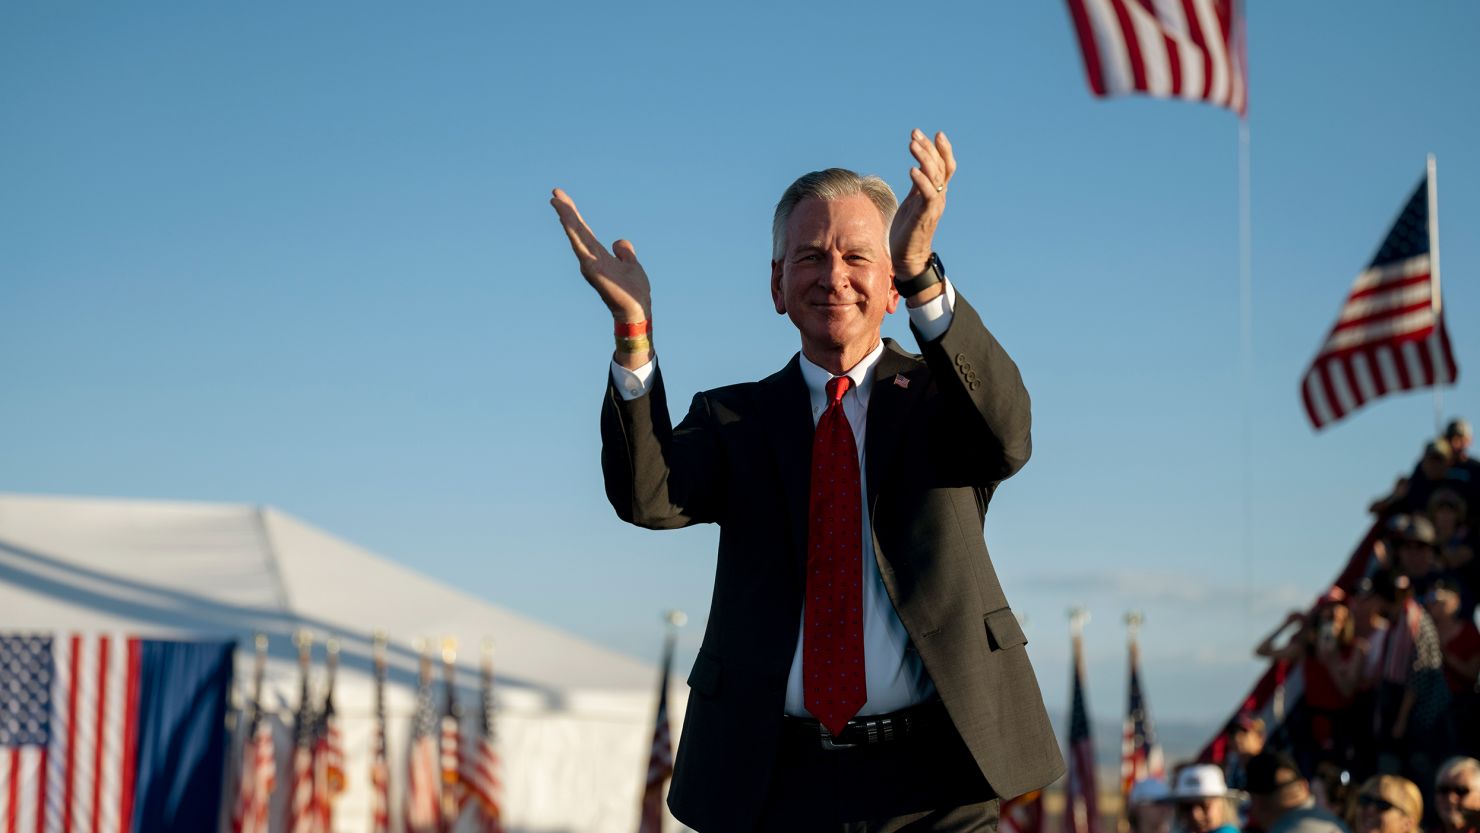 Sen. Tommy Tuberville is introduced at a rally for former President Donald Trump in Nevada on October 8.